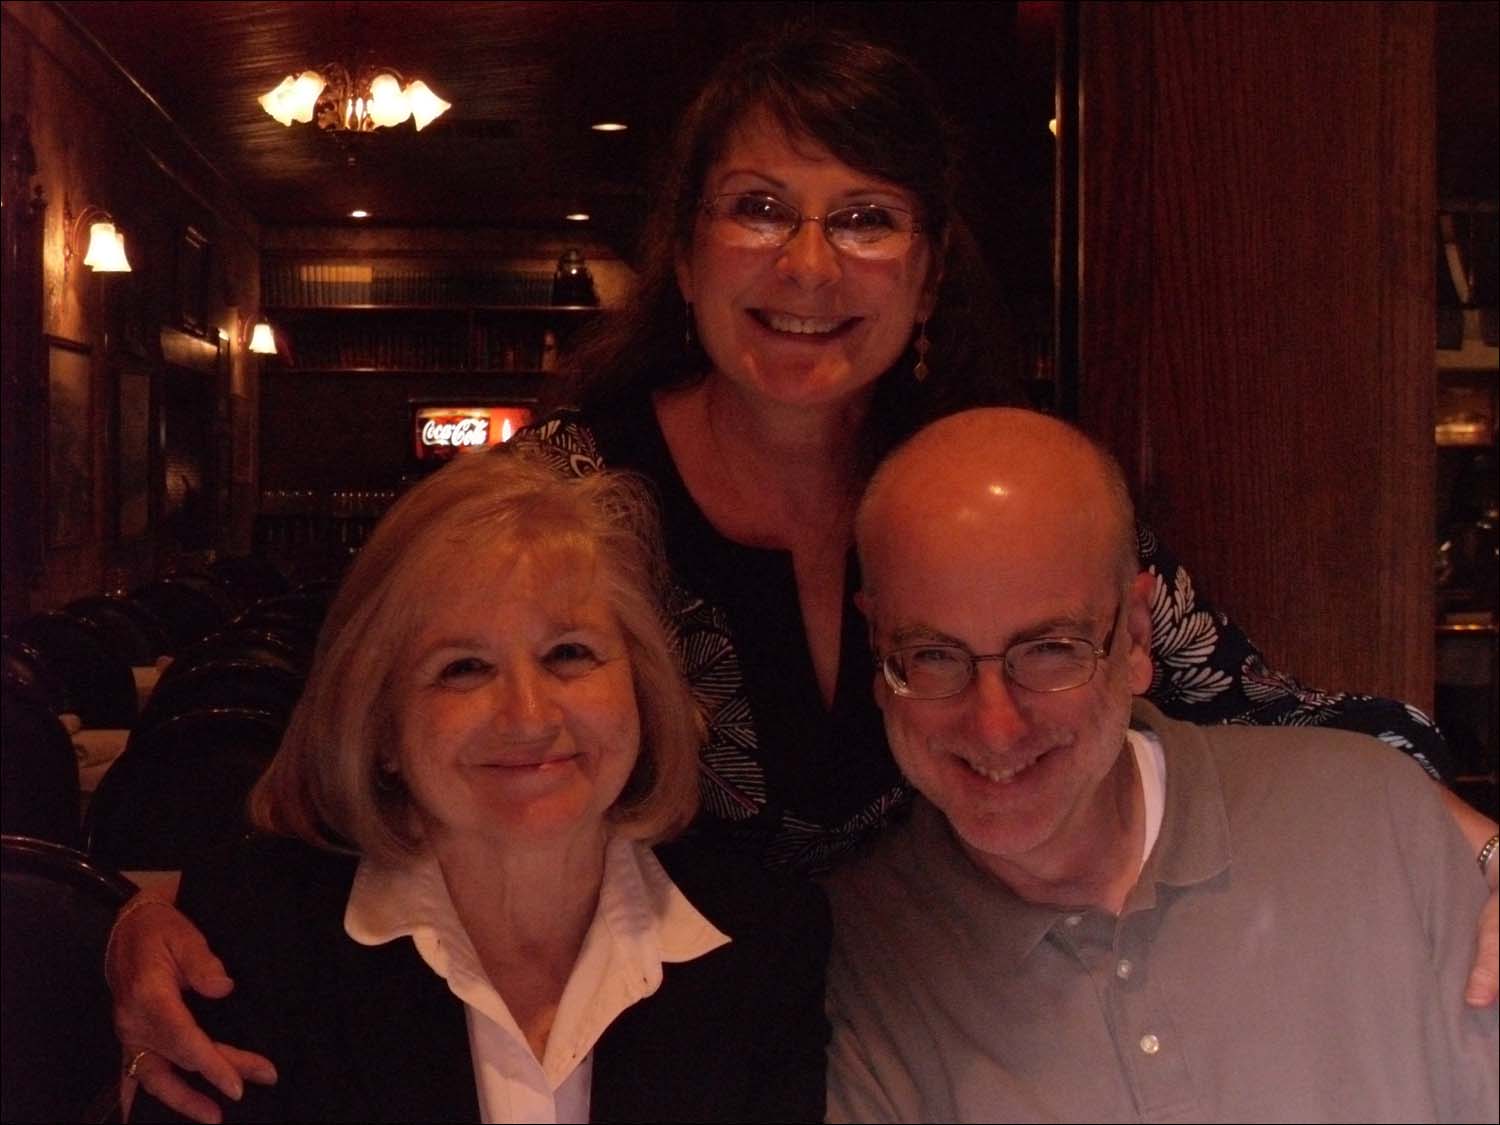 Dinner at The Depot, Colorado Springs, CO-Kath, cousin John and Ginny (wife)